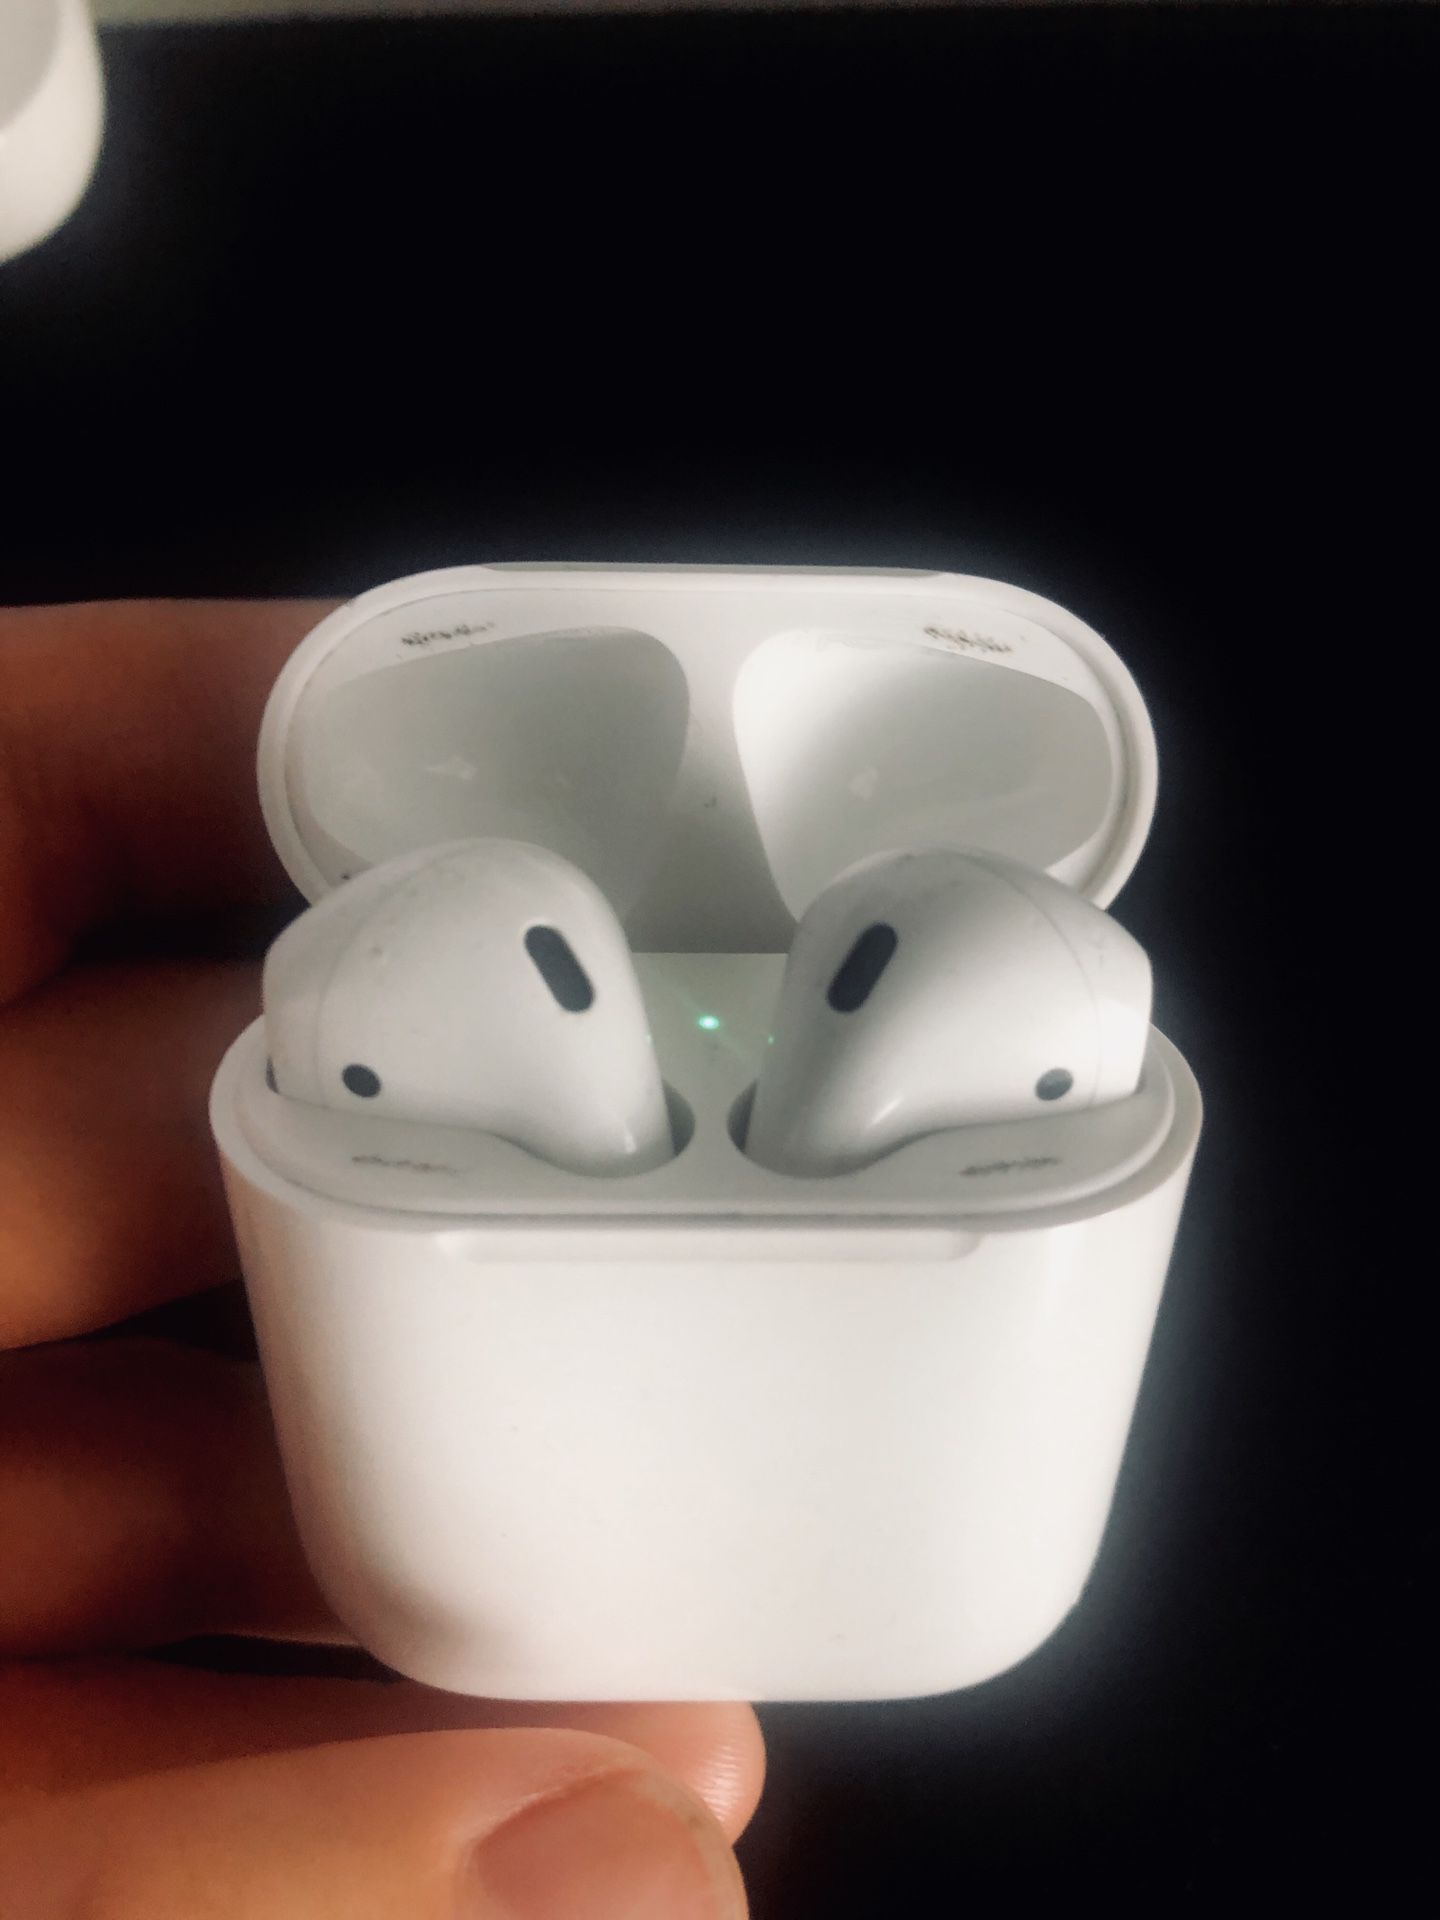 Apple Airpods 1st gen with charging case